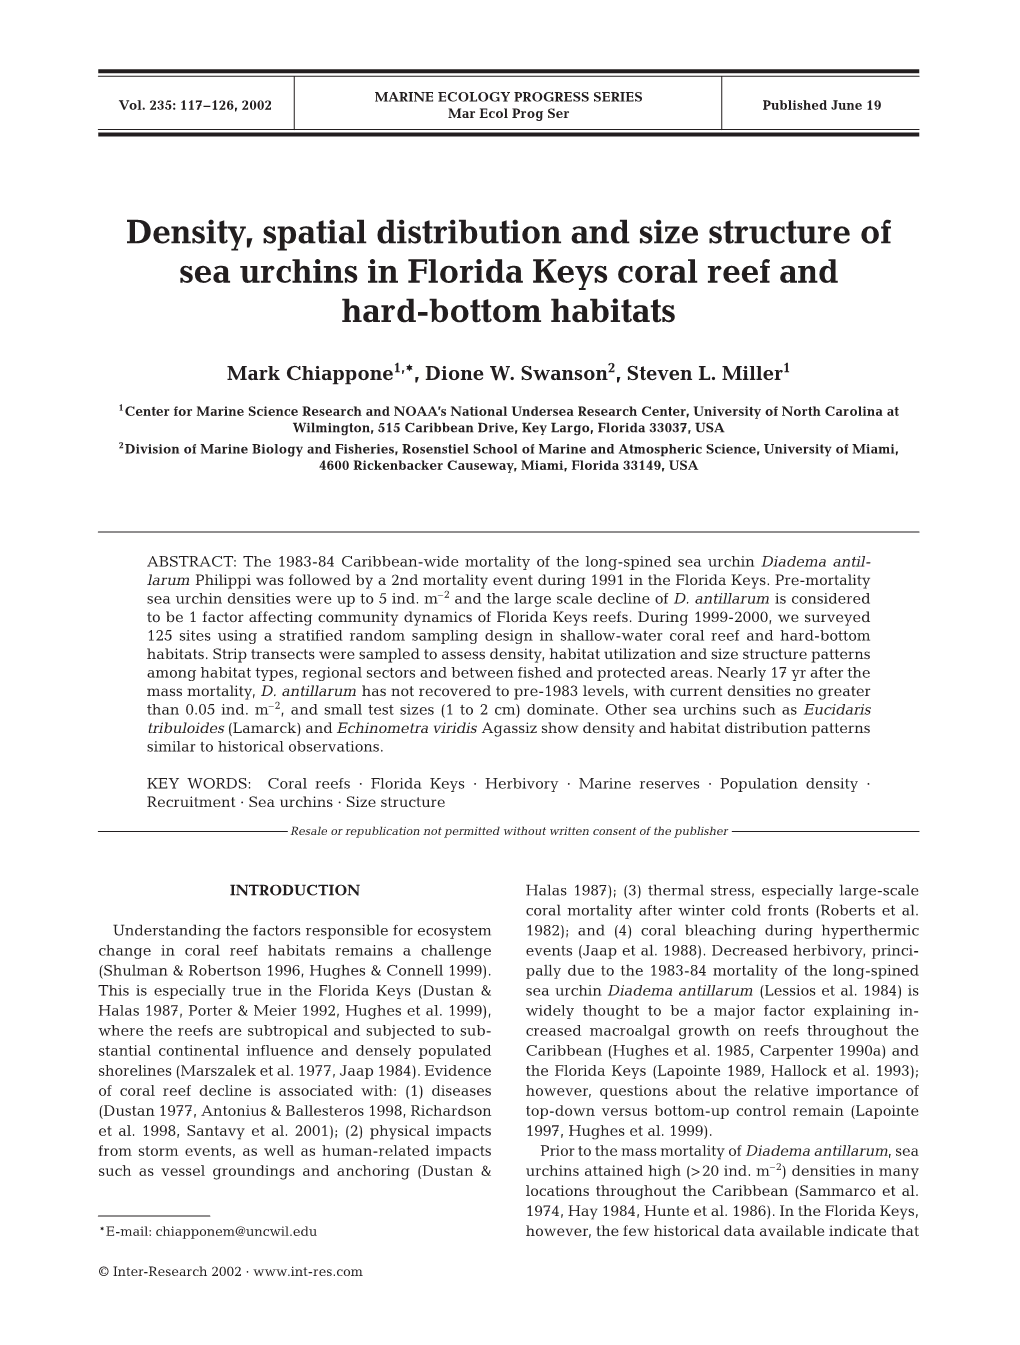 Density, Spatial Distribution and Size Structure of Sea Urchins in Florida Keys Coral Reef and Hard-Bottom Habitats